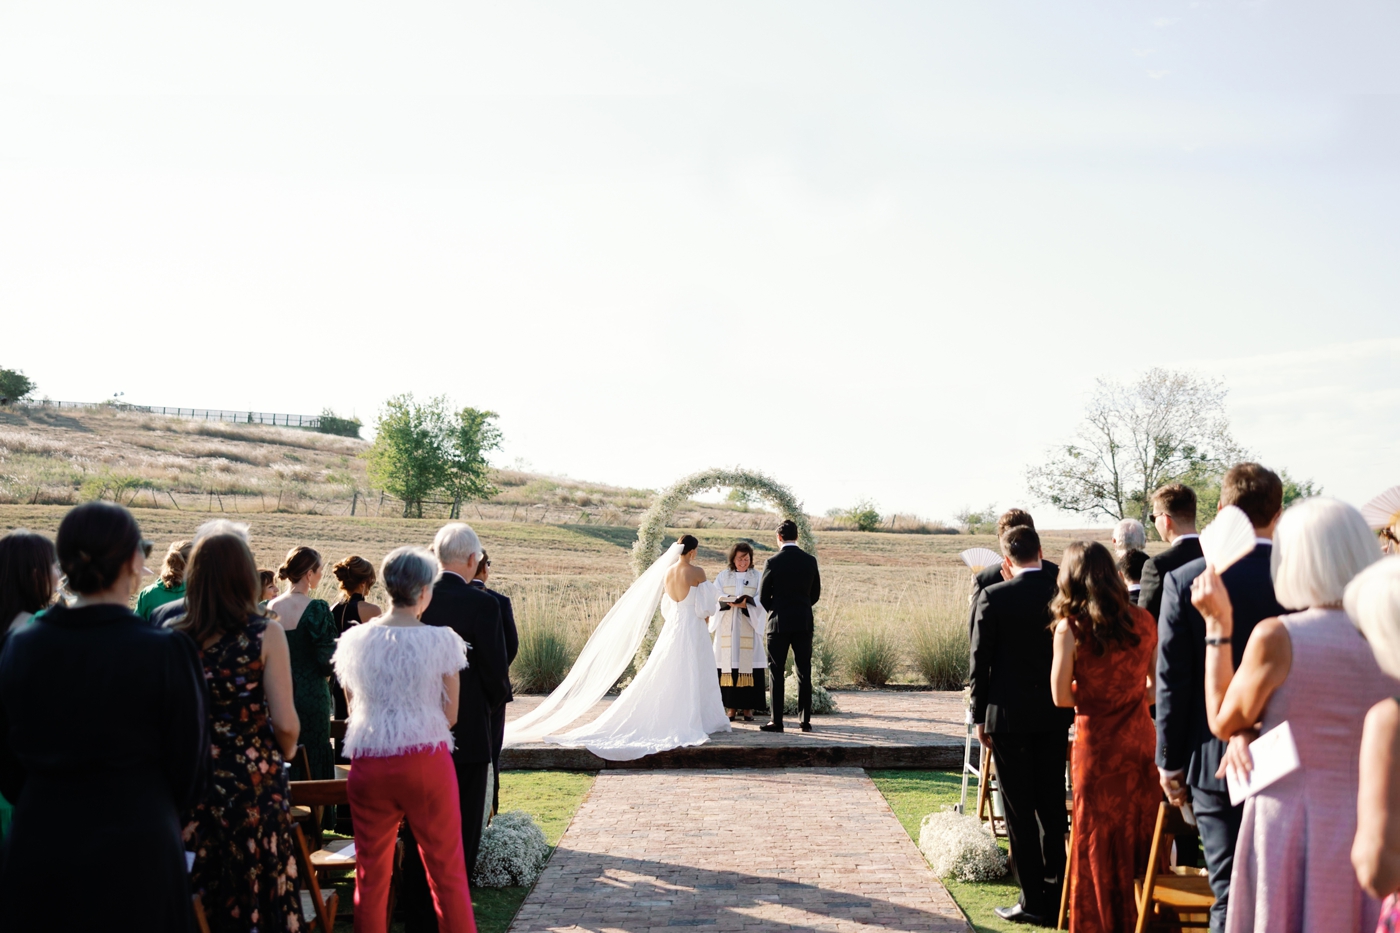 Outdoor ceremony at Two Wishes Ranch with a baby's breath covered ceremony arch